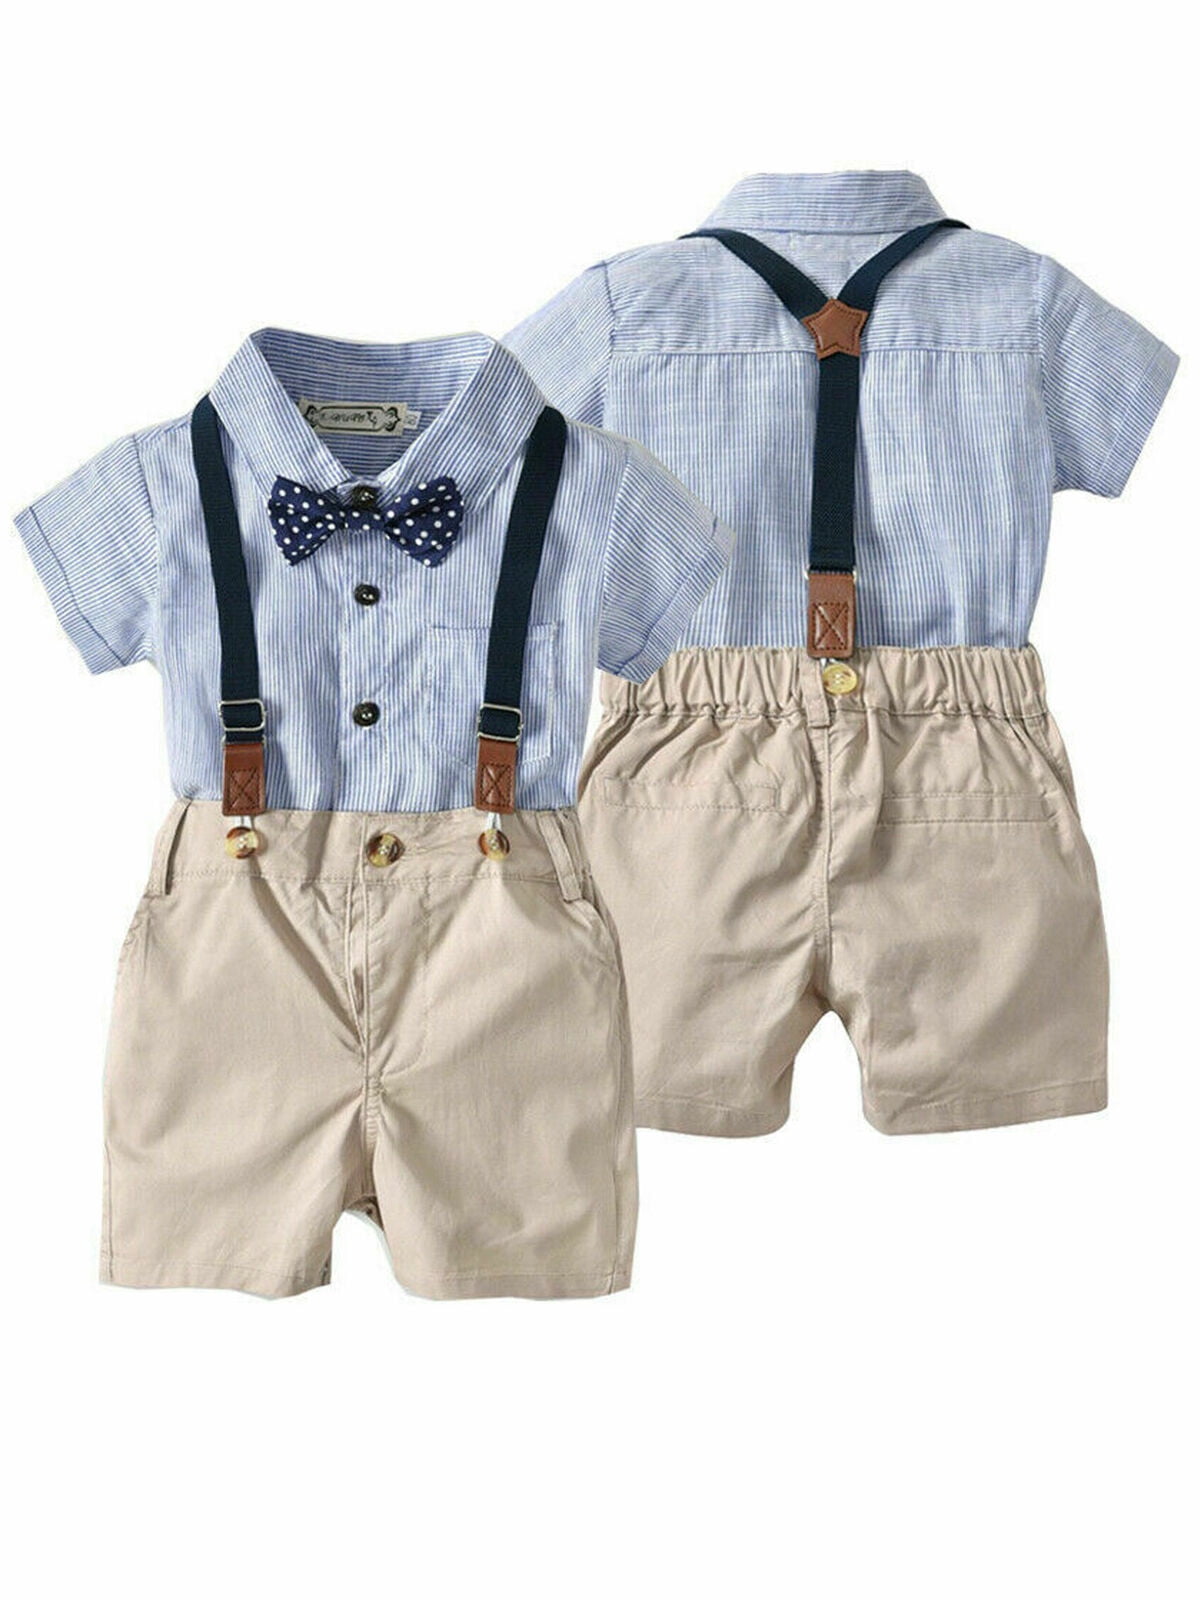 Toddler Kids Baby Boys Outfit Clothes Shirt+Shorts Pants Gentleman Party Suit 